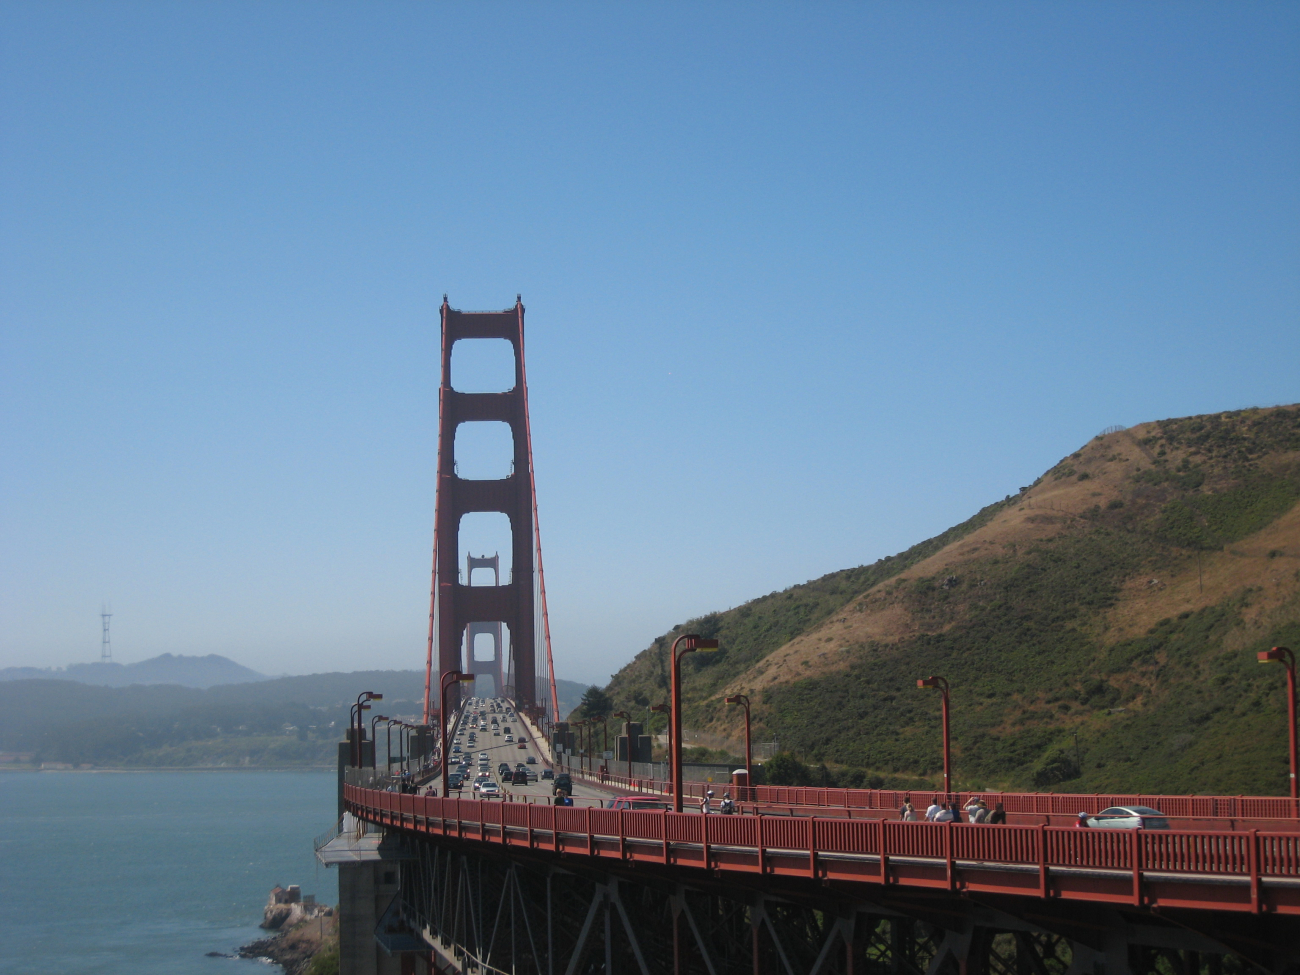 Looking south across the Golden Gate